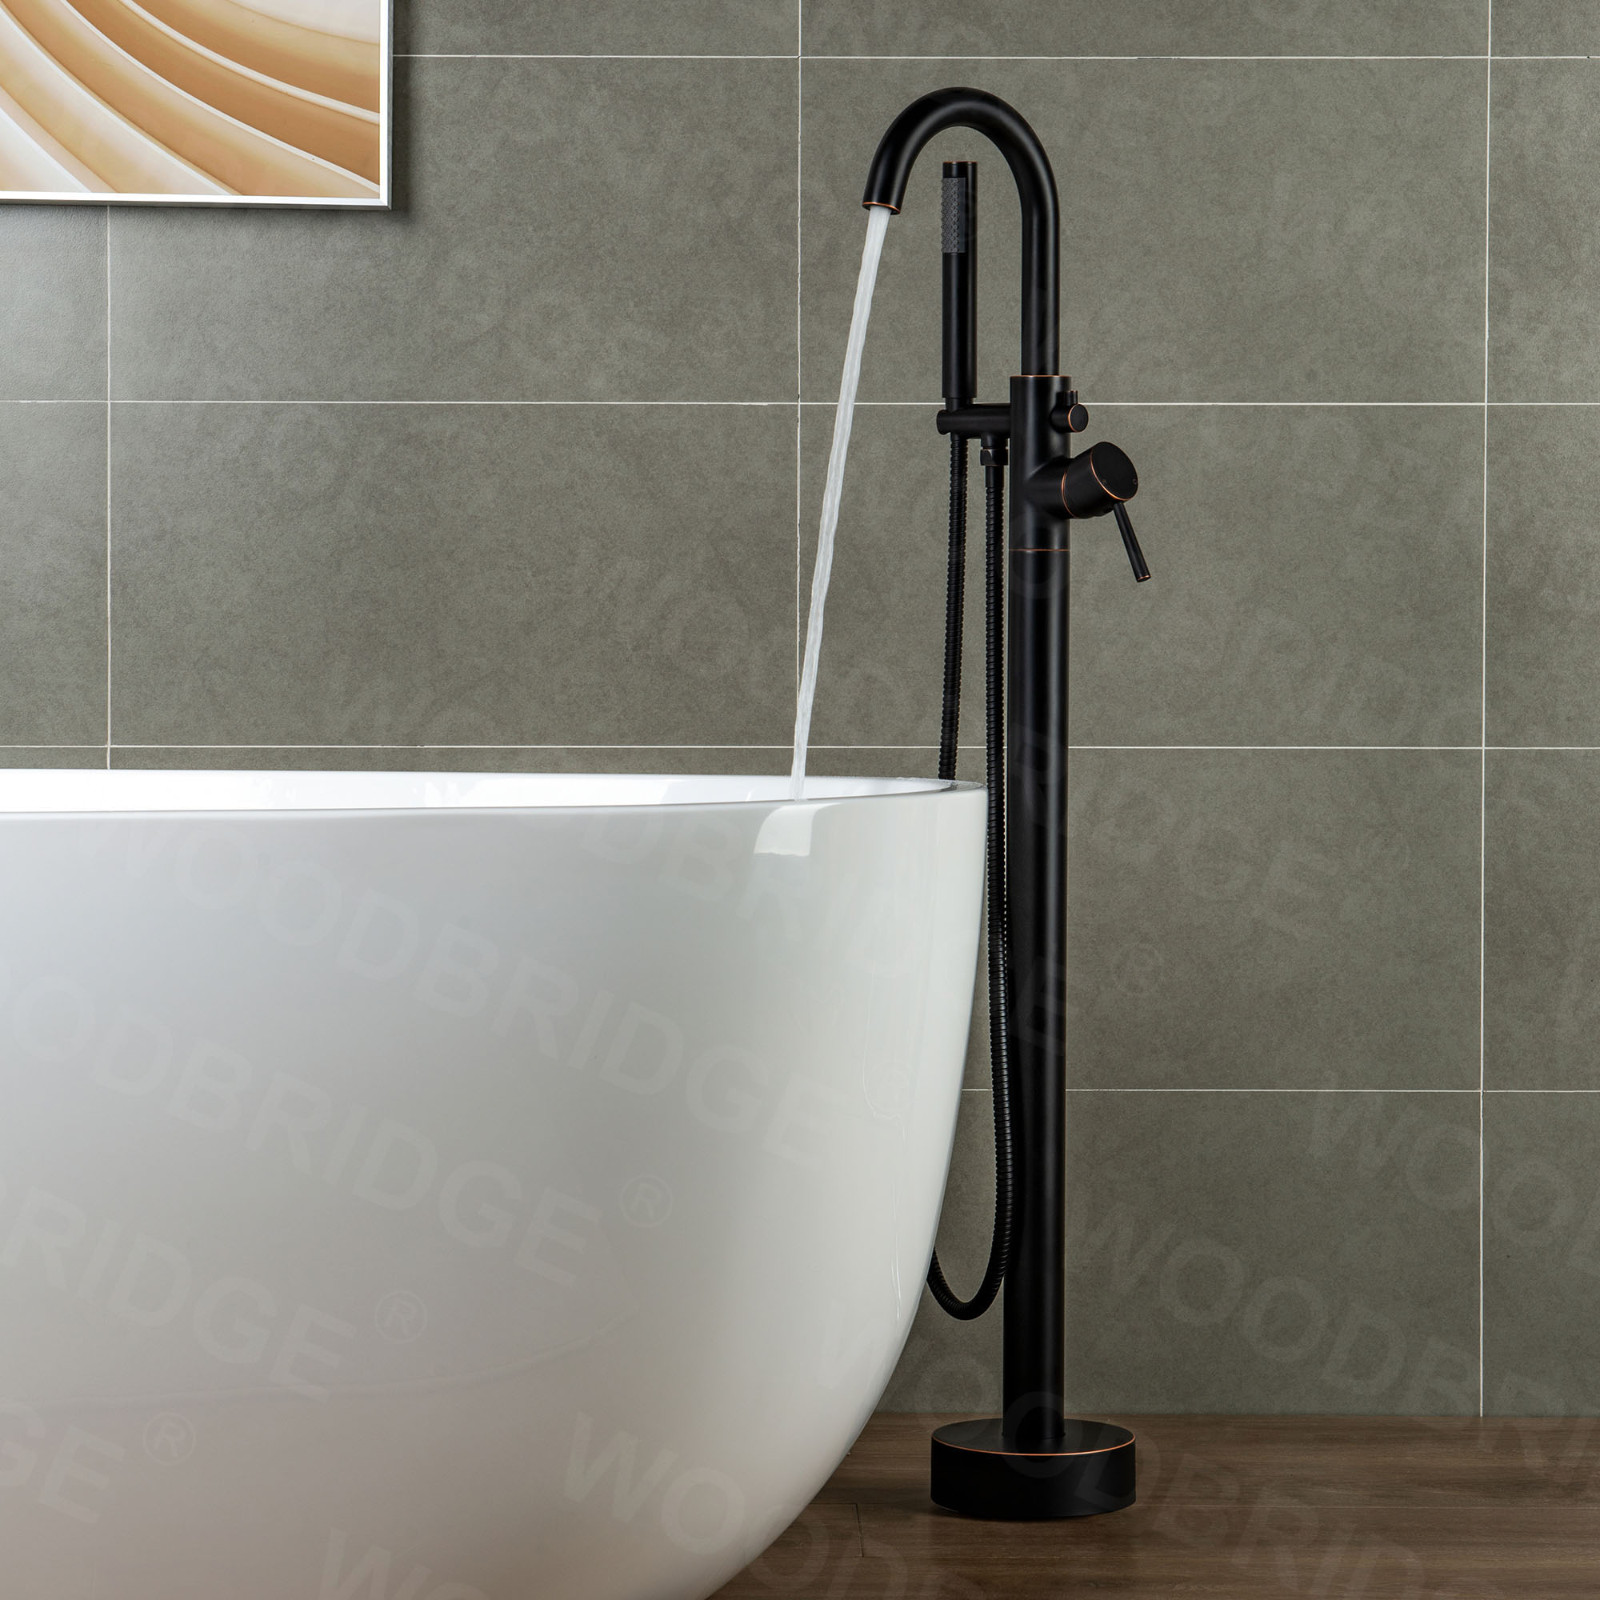  WOODBRIDGE F0010ORBRD Contemporary Single Handle Floor Mount Freestanding Tub Filler Faucet with Hand shower in Oil Rubbed Bronze Finish._9711